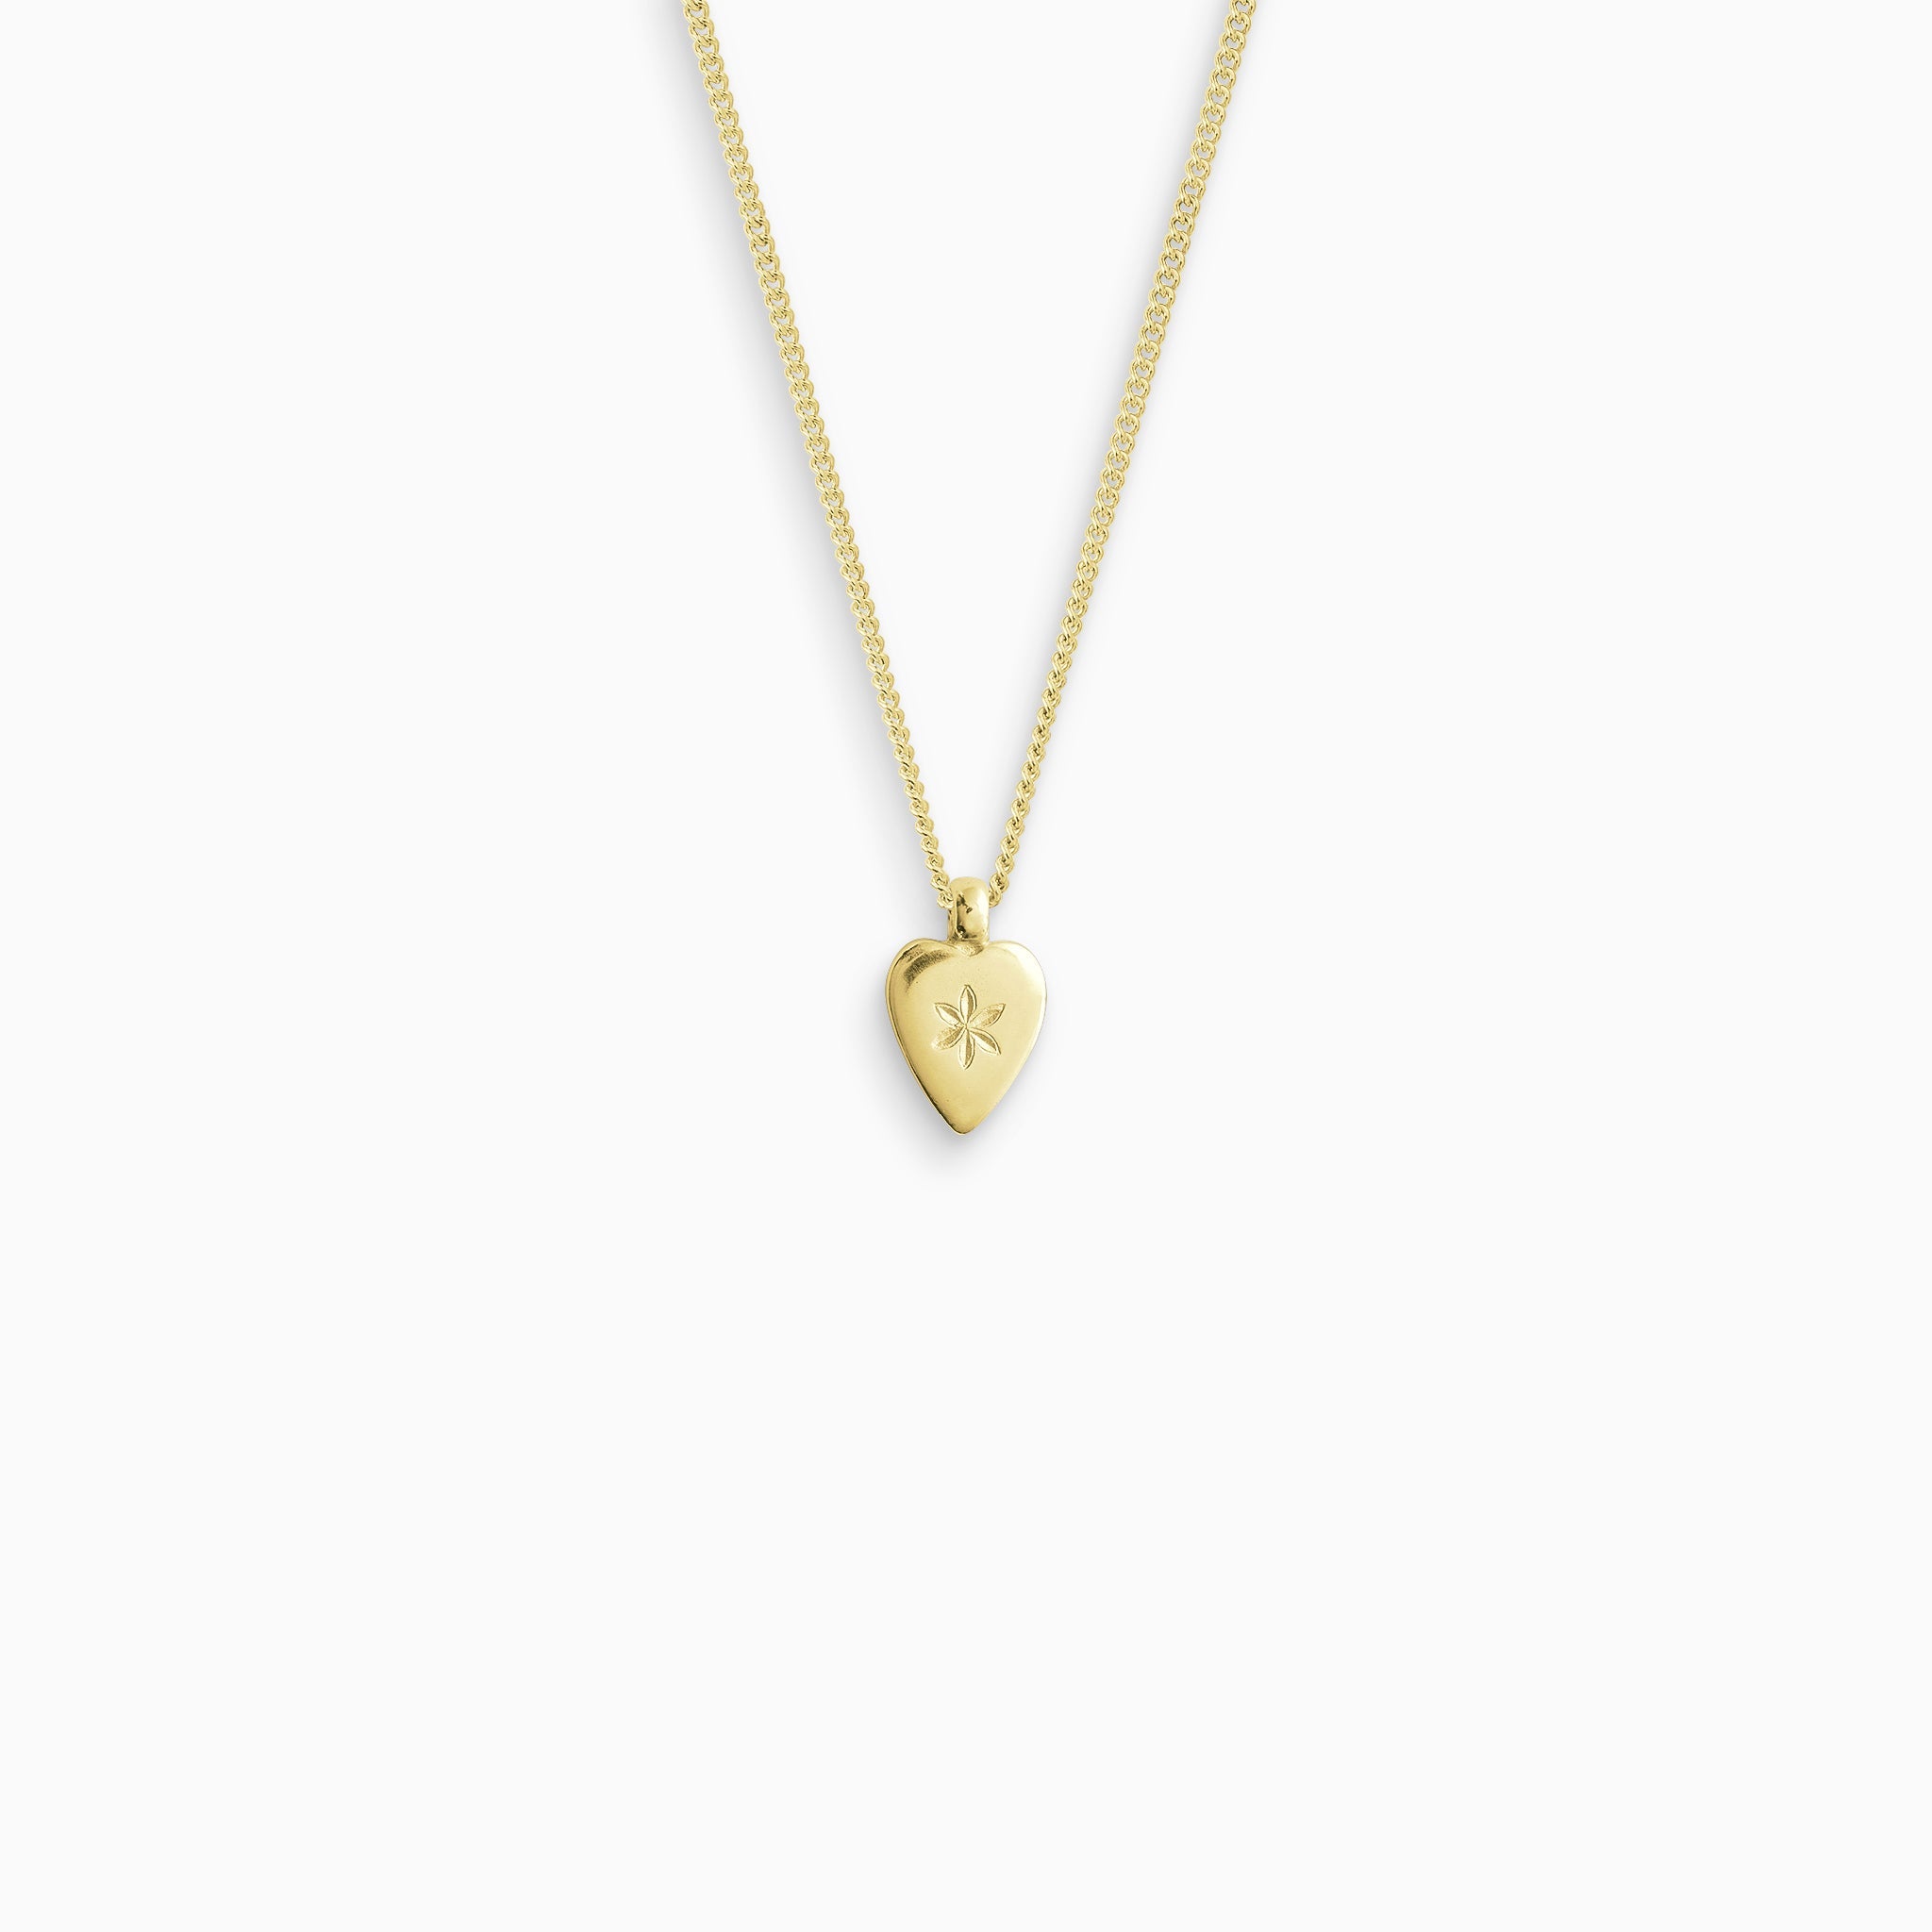 Gold & Pink Twisted Cord Flower Heart Pendant Necklace - Lovisa